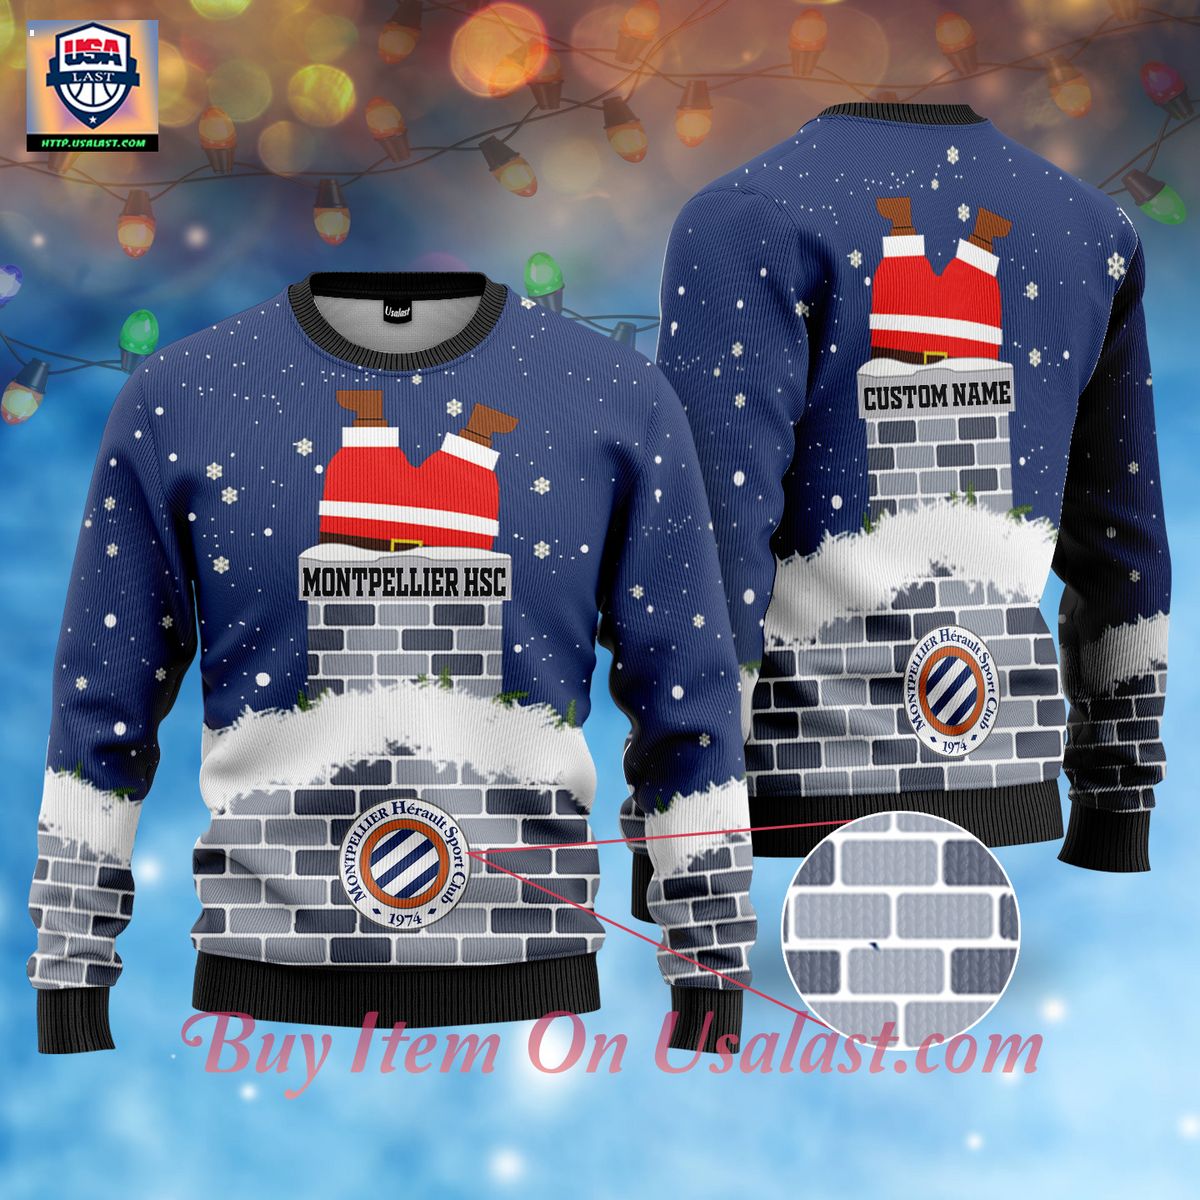 Montpellier HSC Santa Claus Custom Name Ugly Christmas Sweater - You look lazy